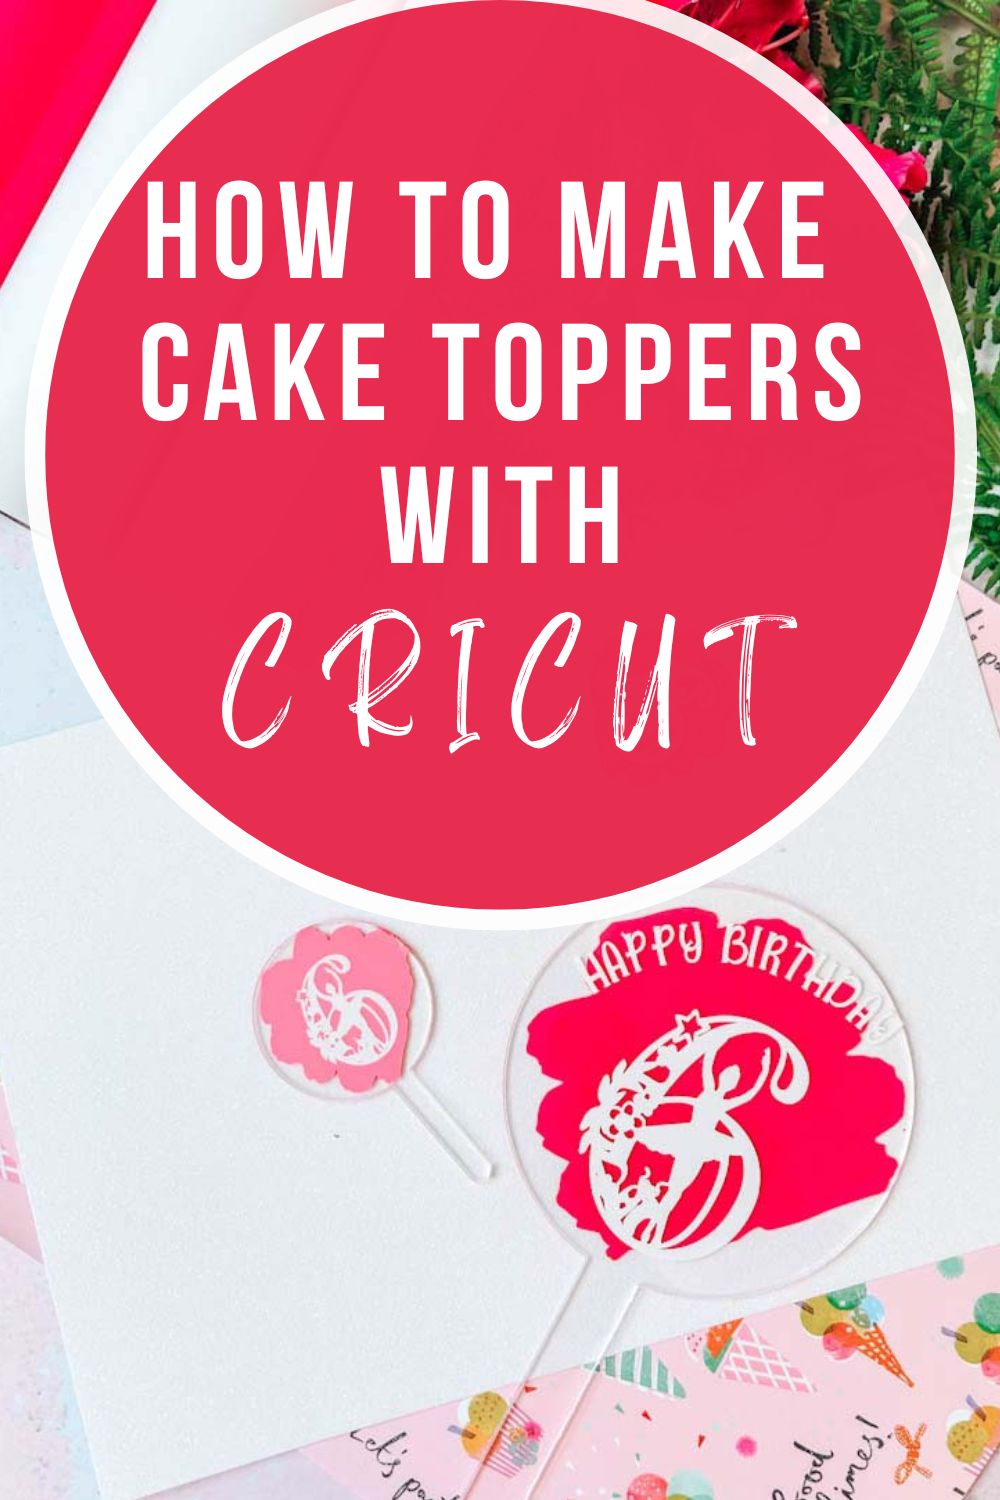 How to make Cake Toppers With Cricut